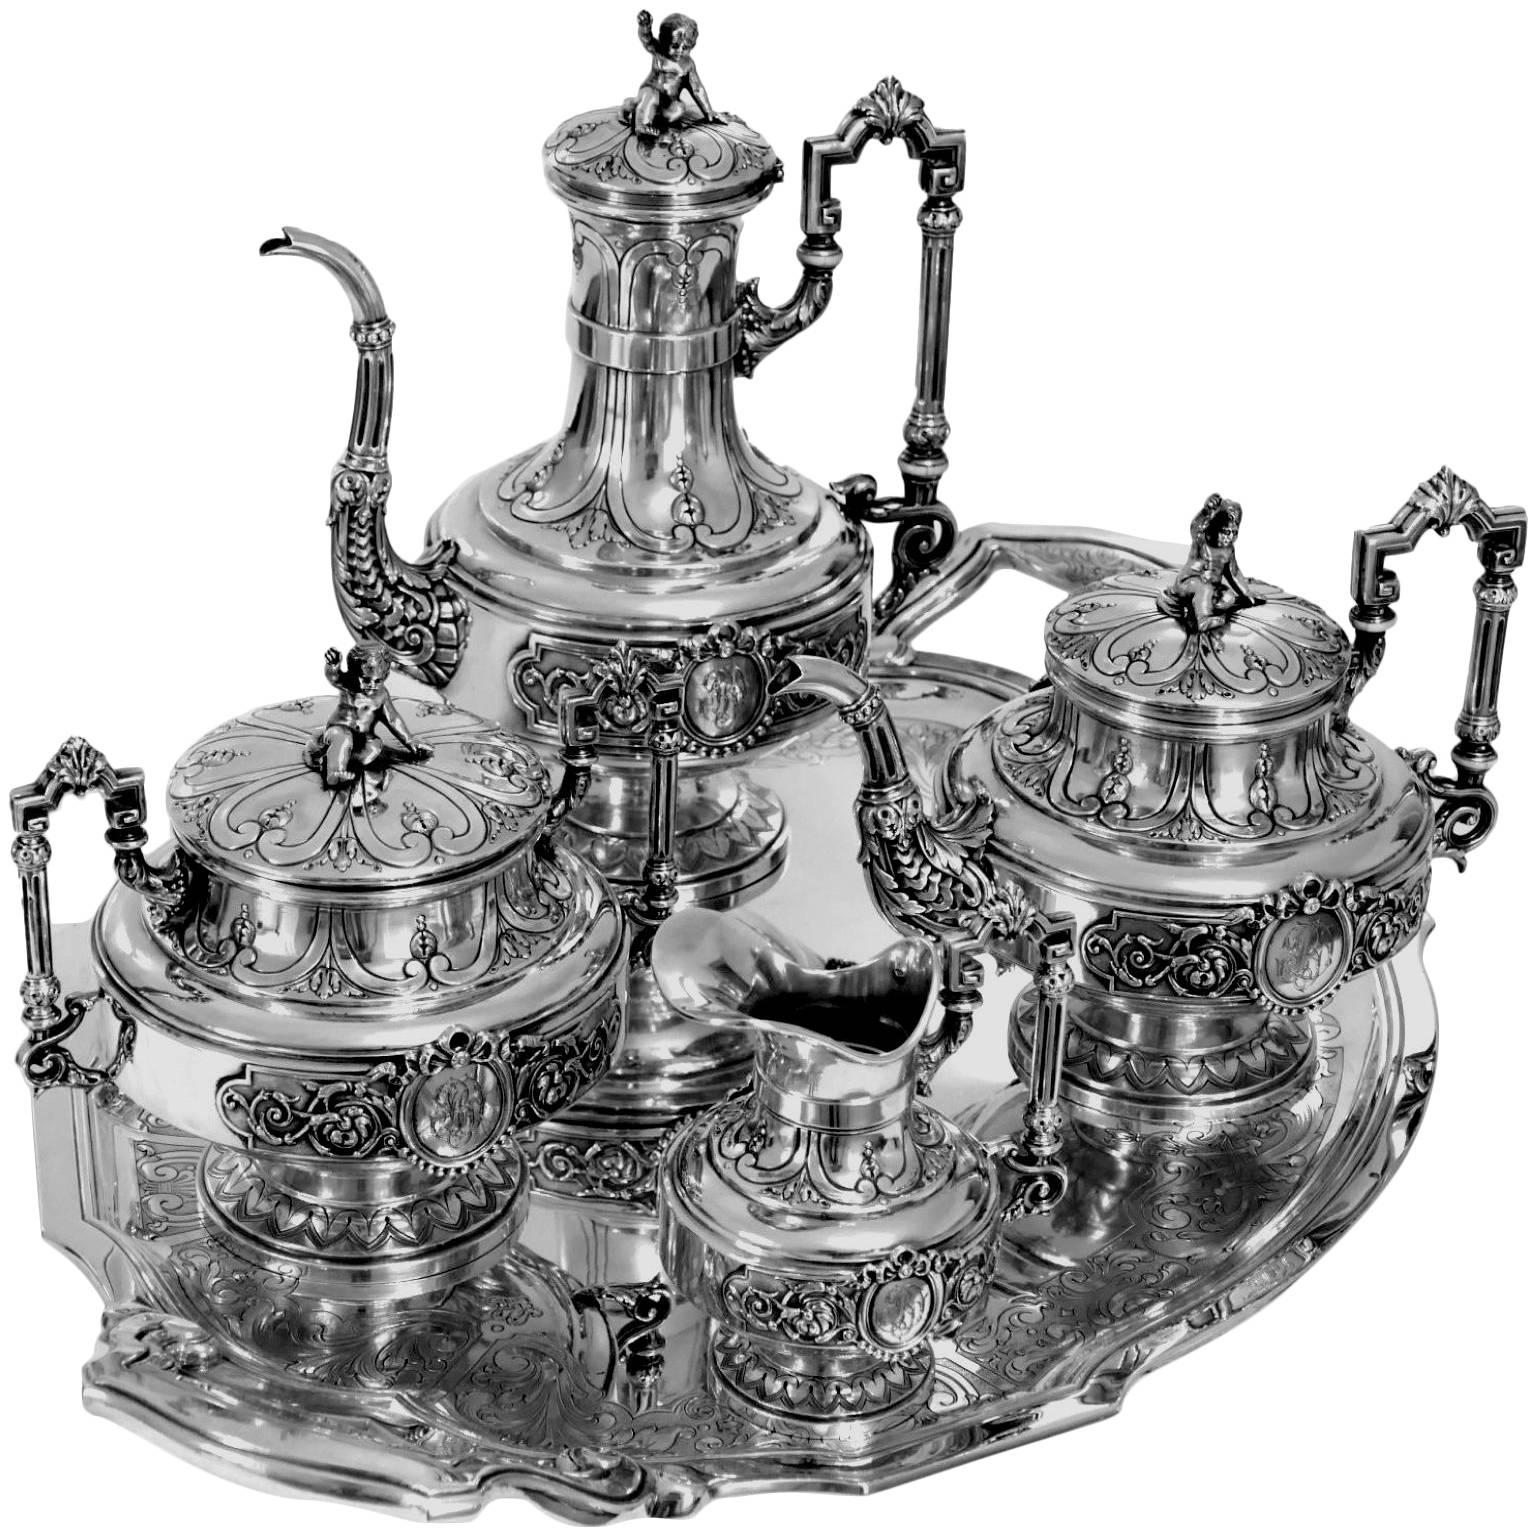 Boulenger Fabulous French All Sterling Silver Tea & Coffee Service 5 pc Putti